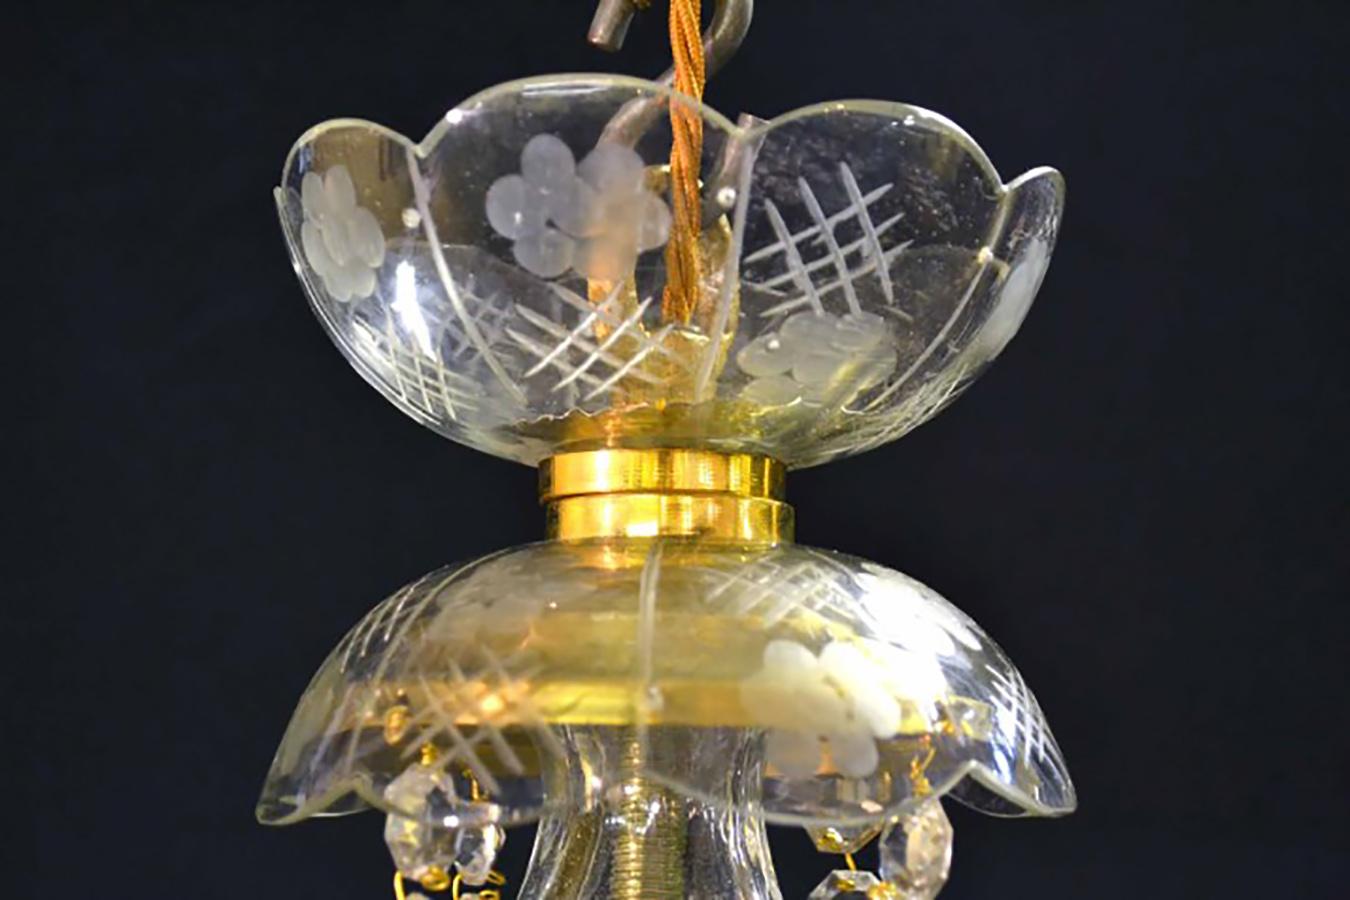 A beautiful small vintage Venetian style crystal chandelier with four lights and beautiful clear crystal drops, dating from the last quarter of the 20th century.

It is in fantastic condition as it has been dismantled, cleaned and rewired.

Add a